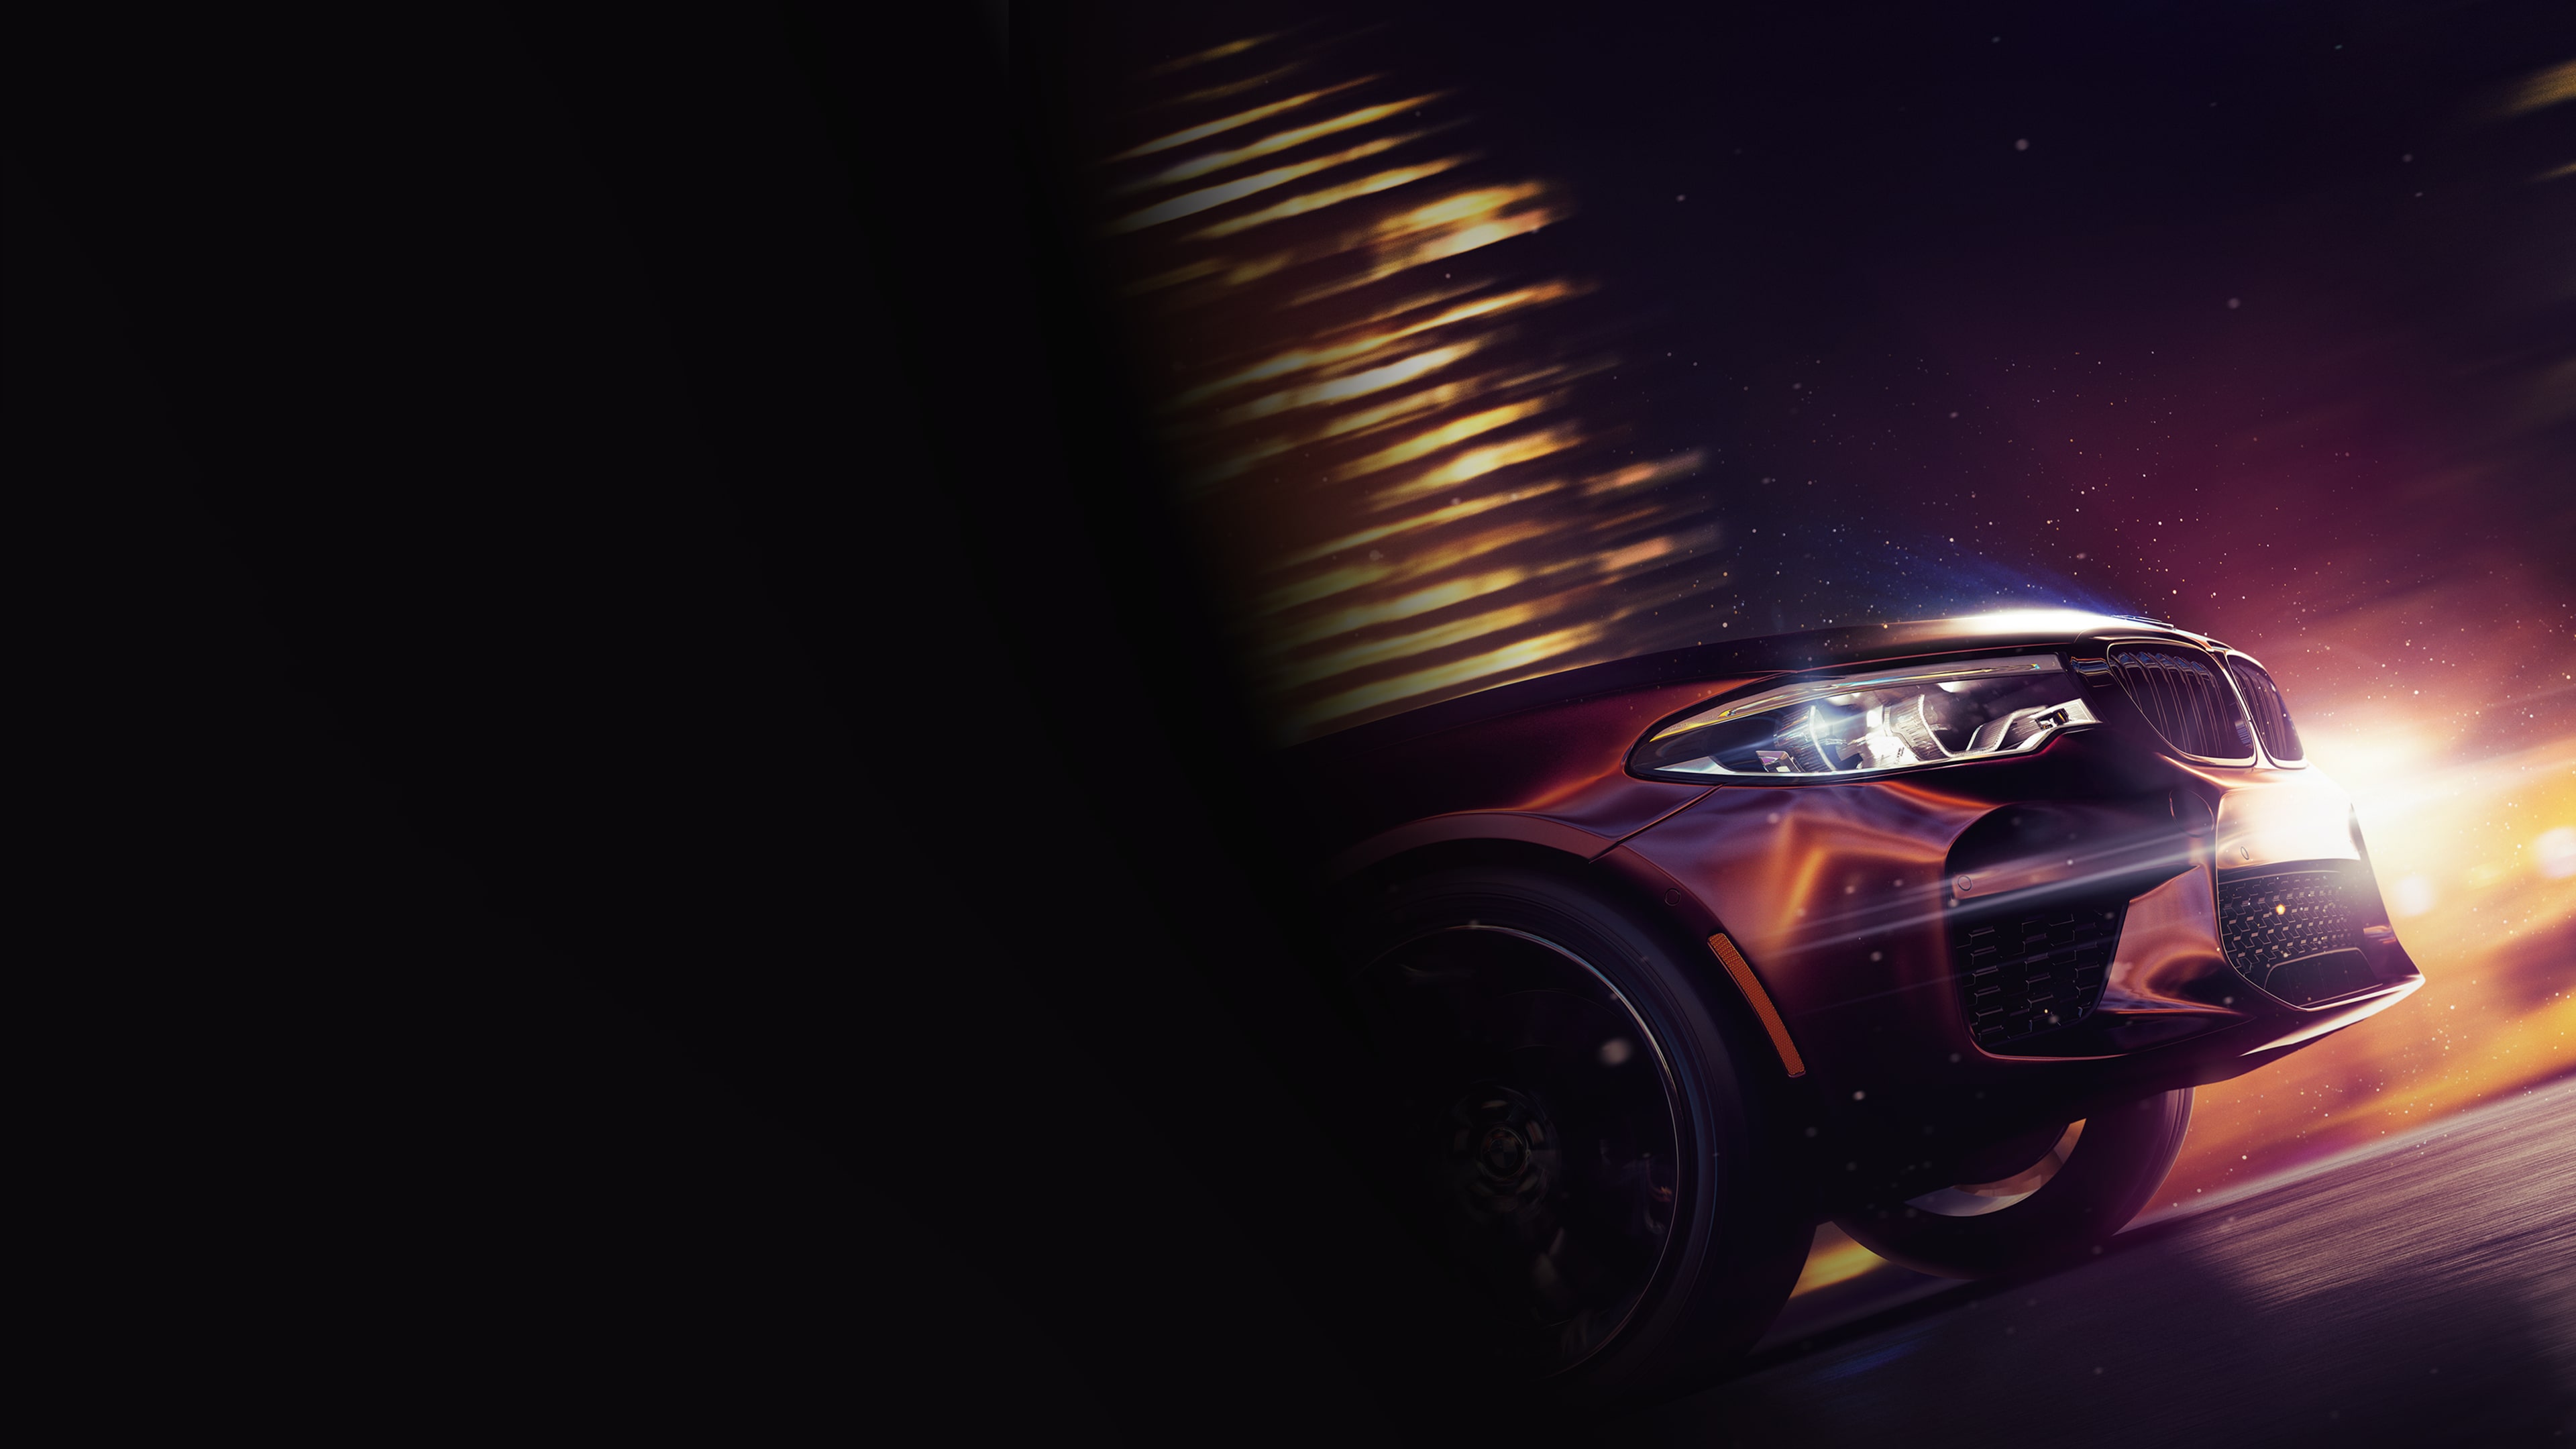 Need For Speed Payback: Speedcross Story Bundle on PS4 — price